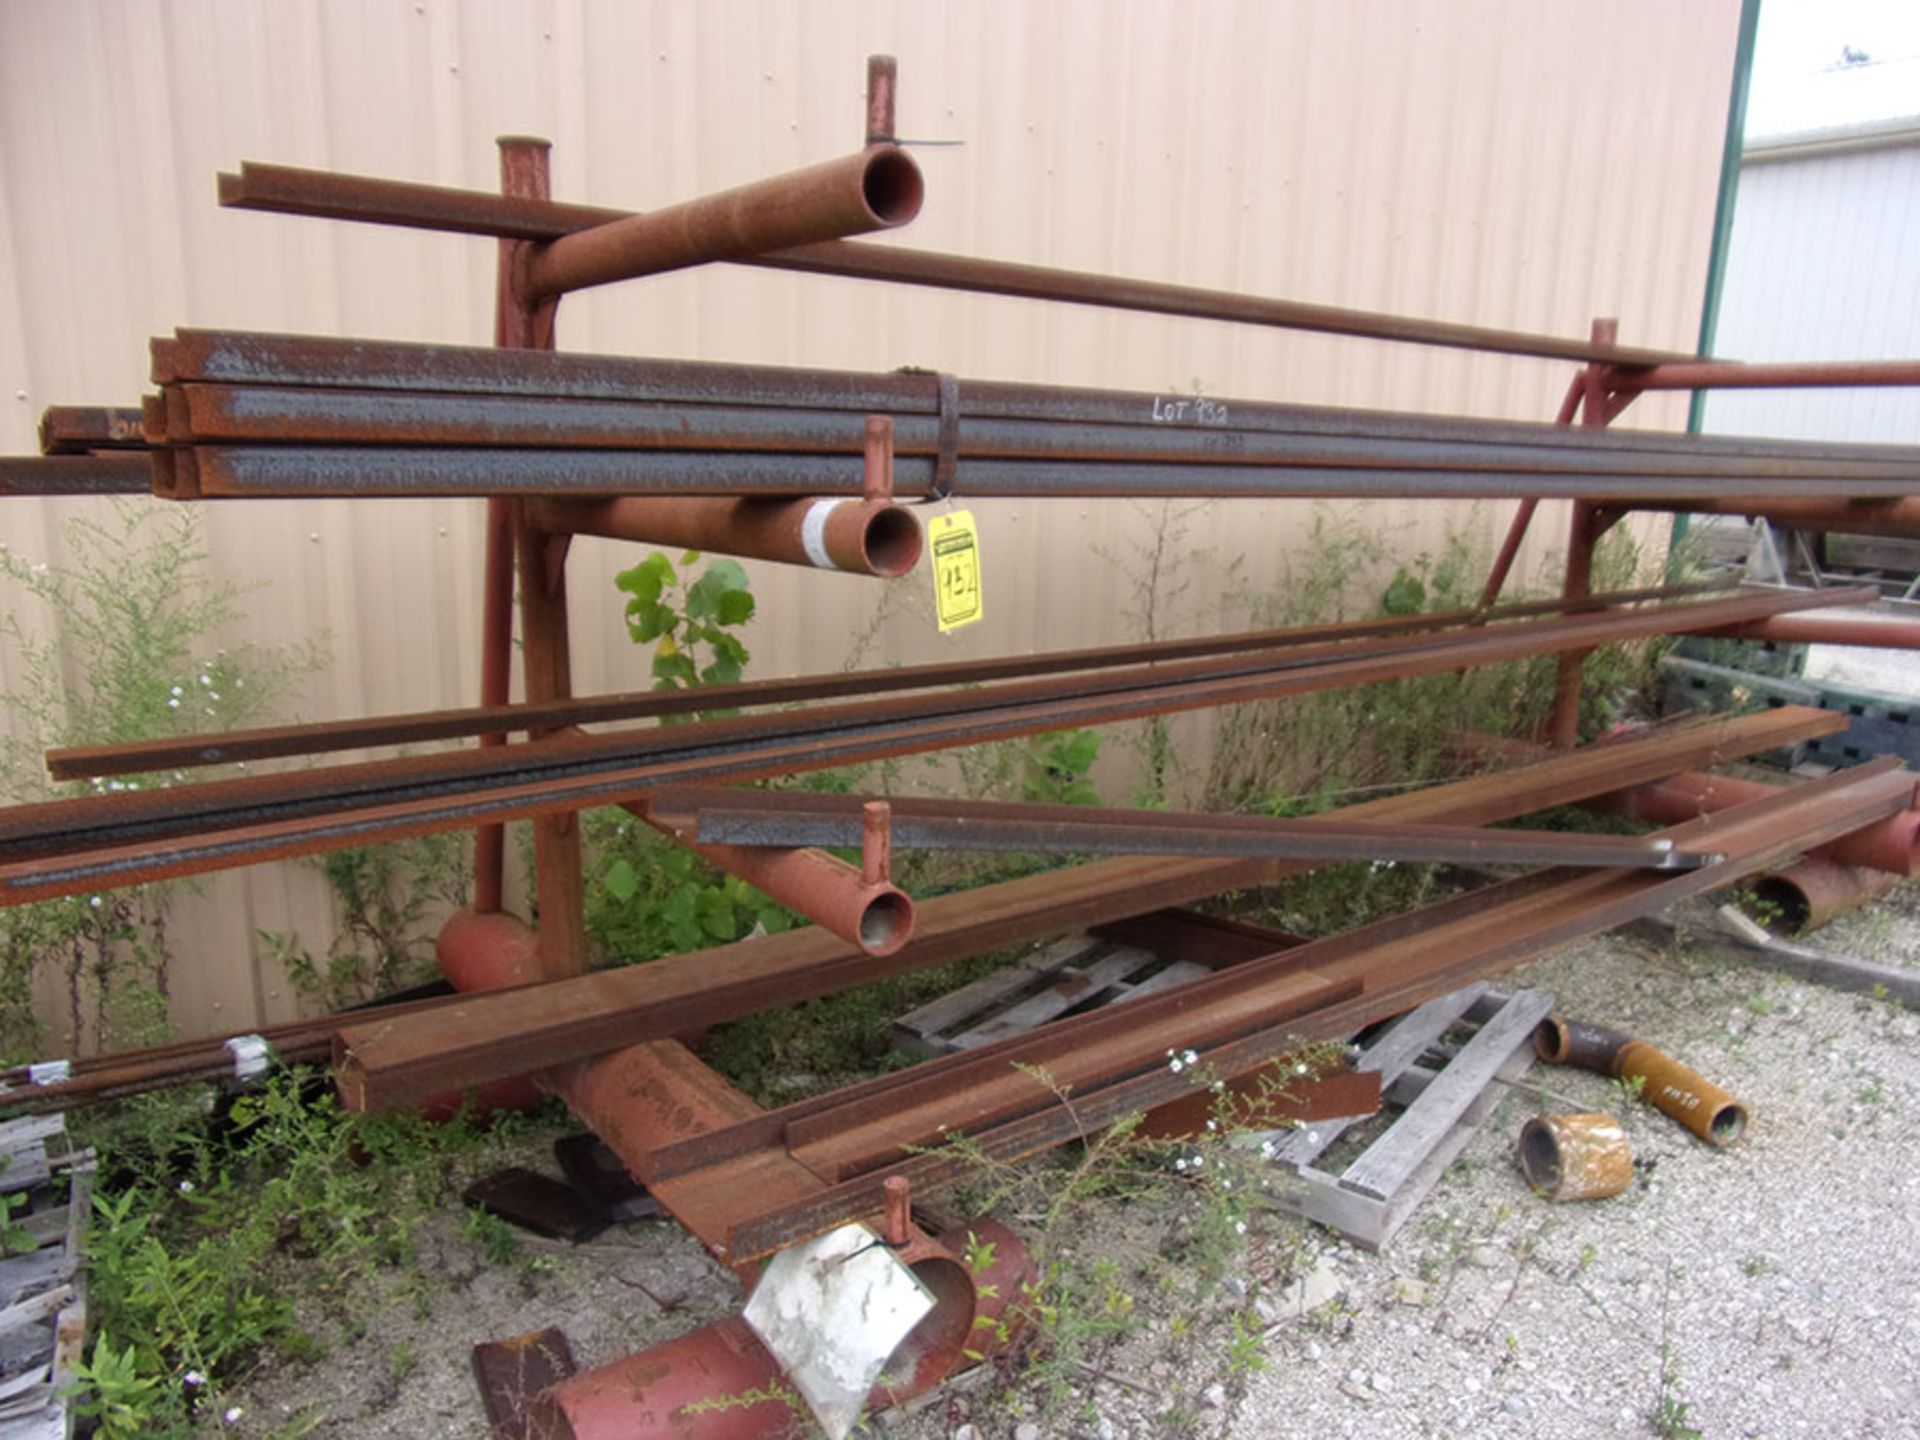 LOT OF CHANNEL STEEL WITH RACK